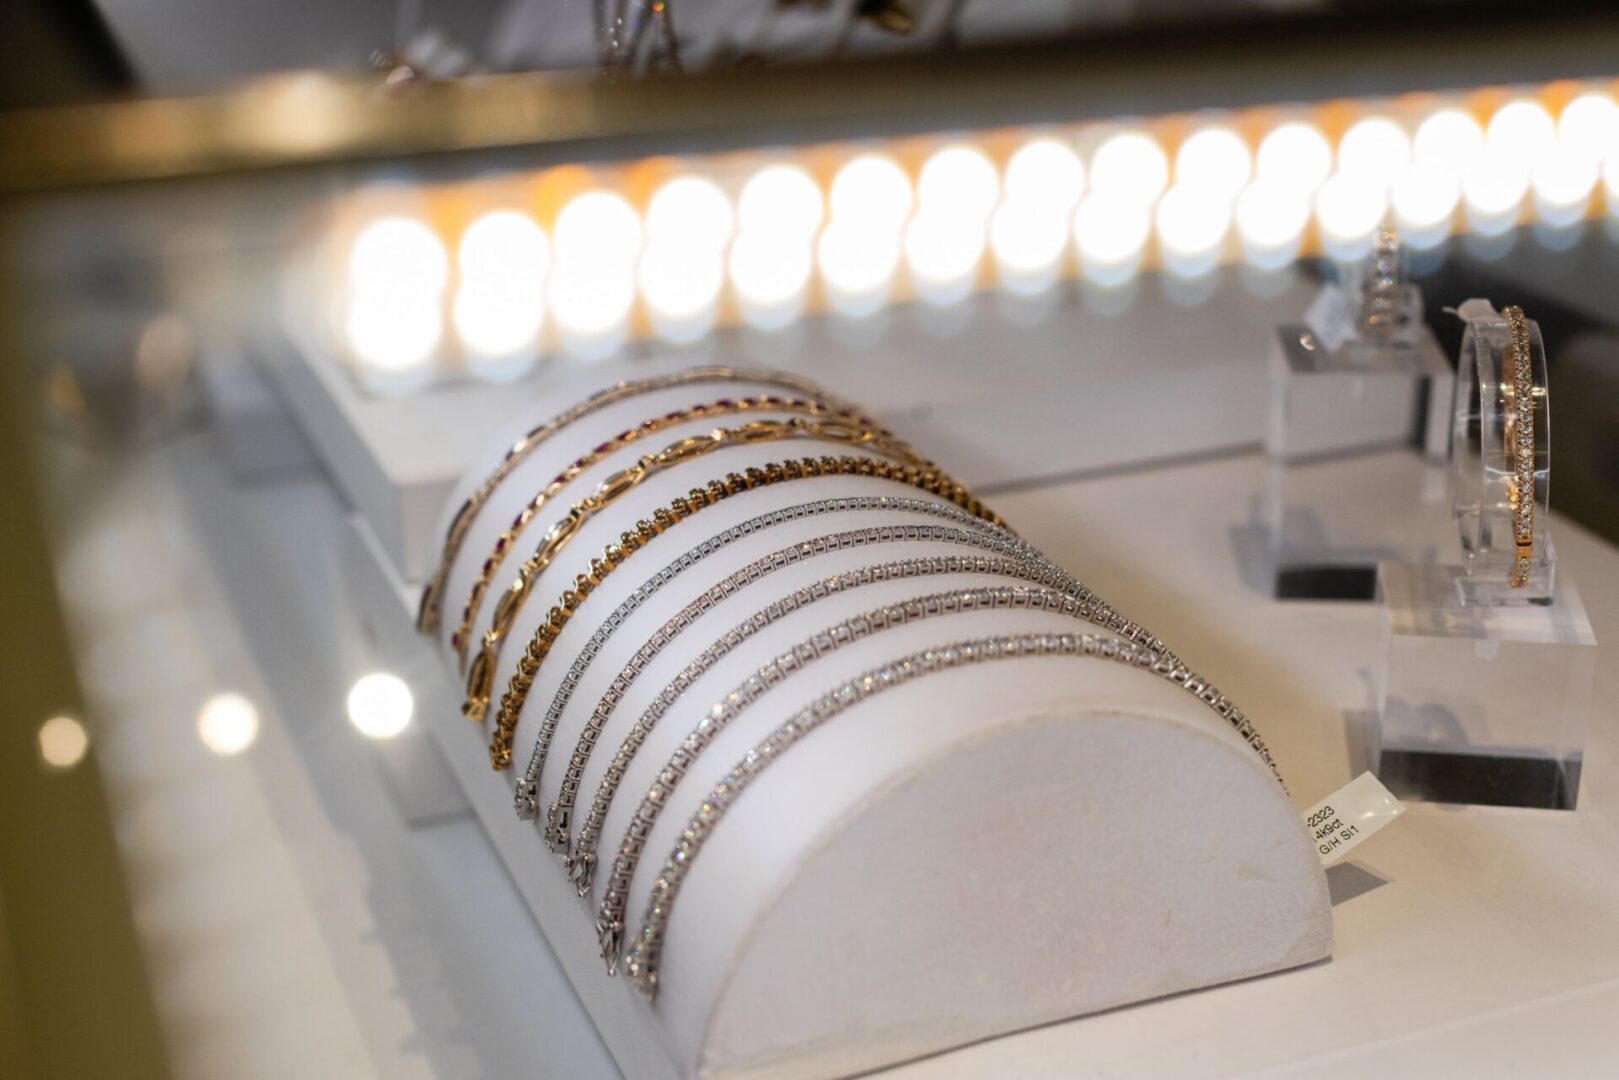 A row of white bracelets sitting on top of a table.